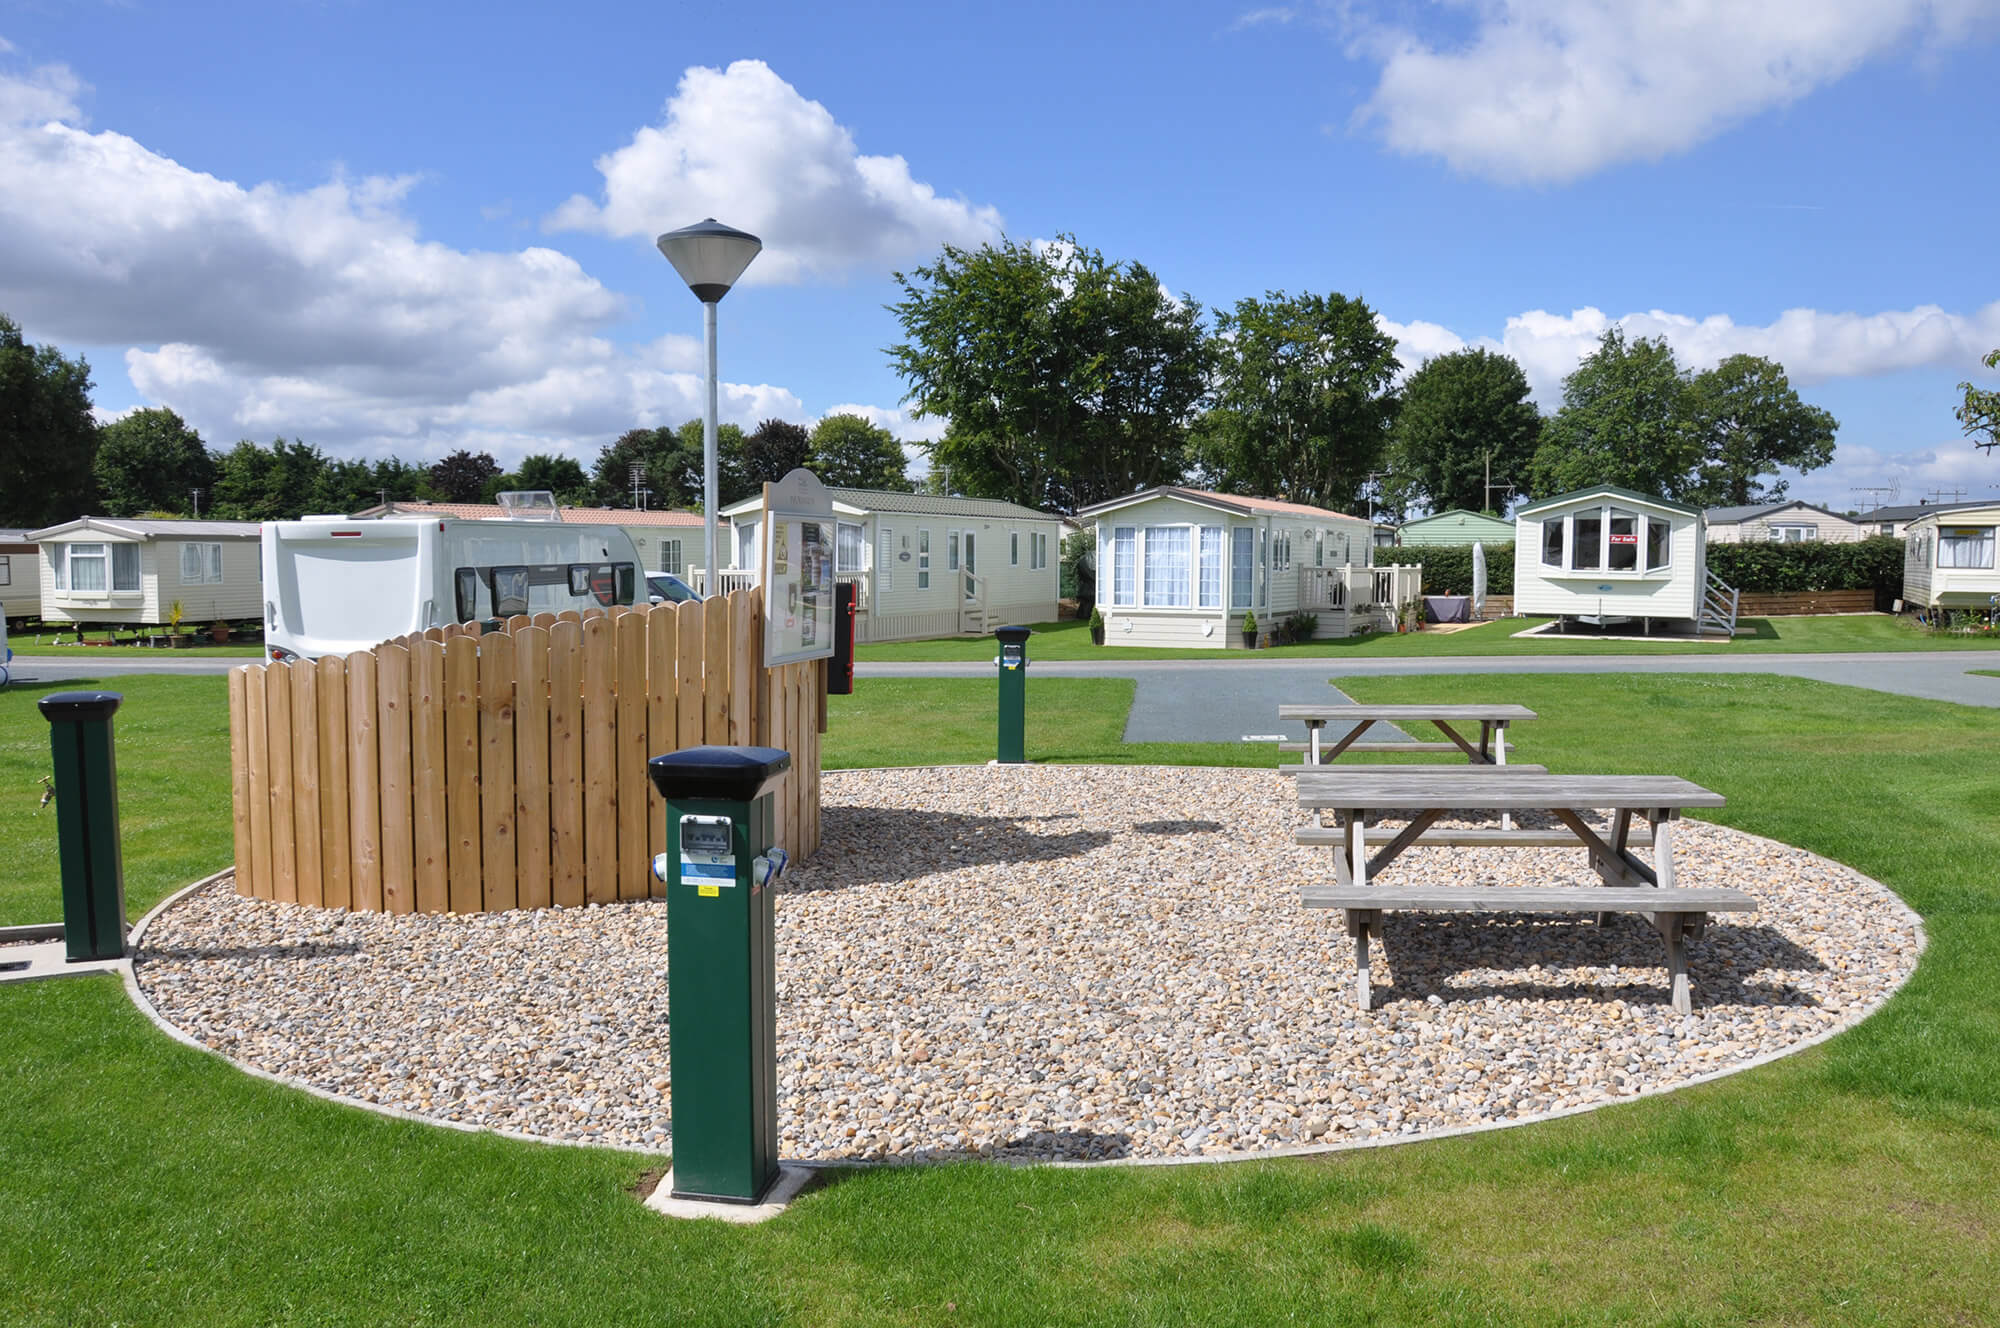 Seasonal touring pitches and communal facilities at Old Hall